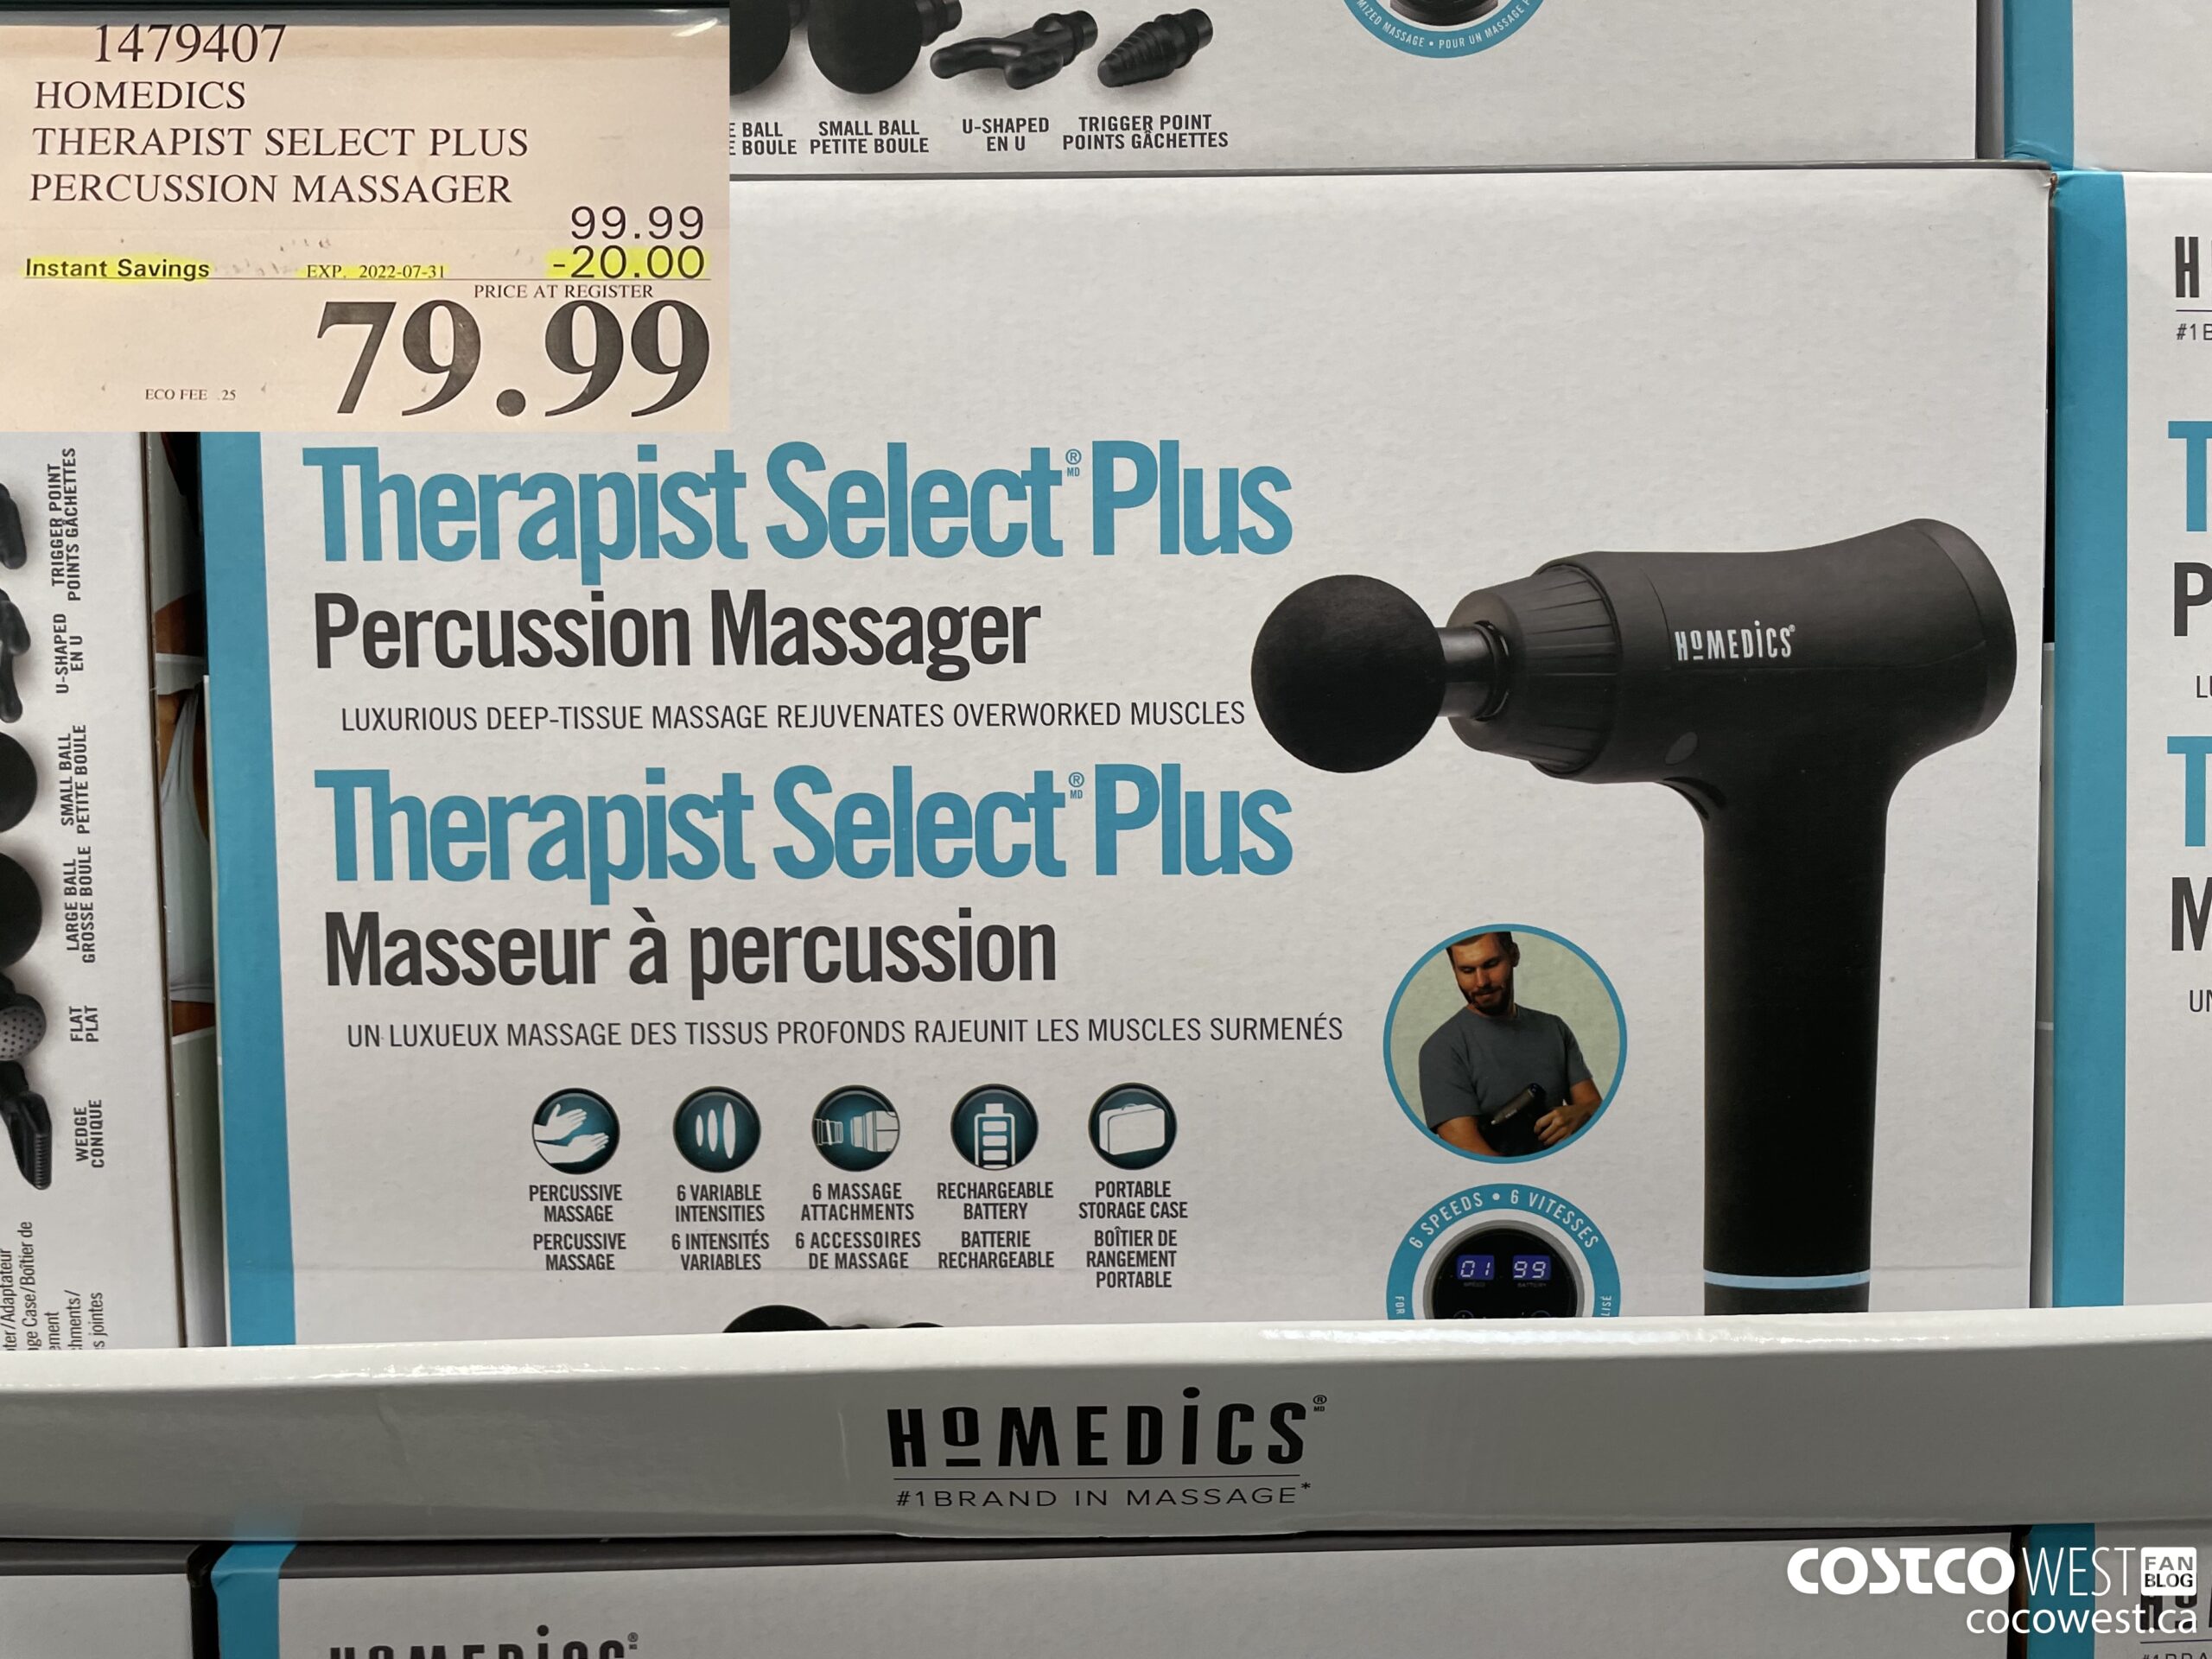 https://west.cocowest1.ca/2022/07/HOMEDICS_THERAPIST_SELECT_PLUS_PERCUSSION_MASSAGER_20220725_94184-scaled.jpg